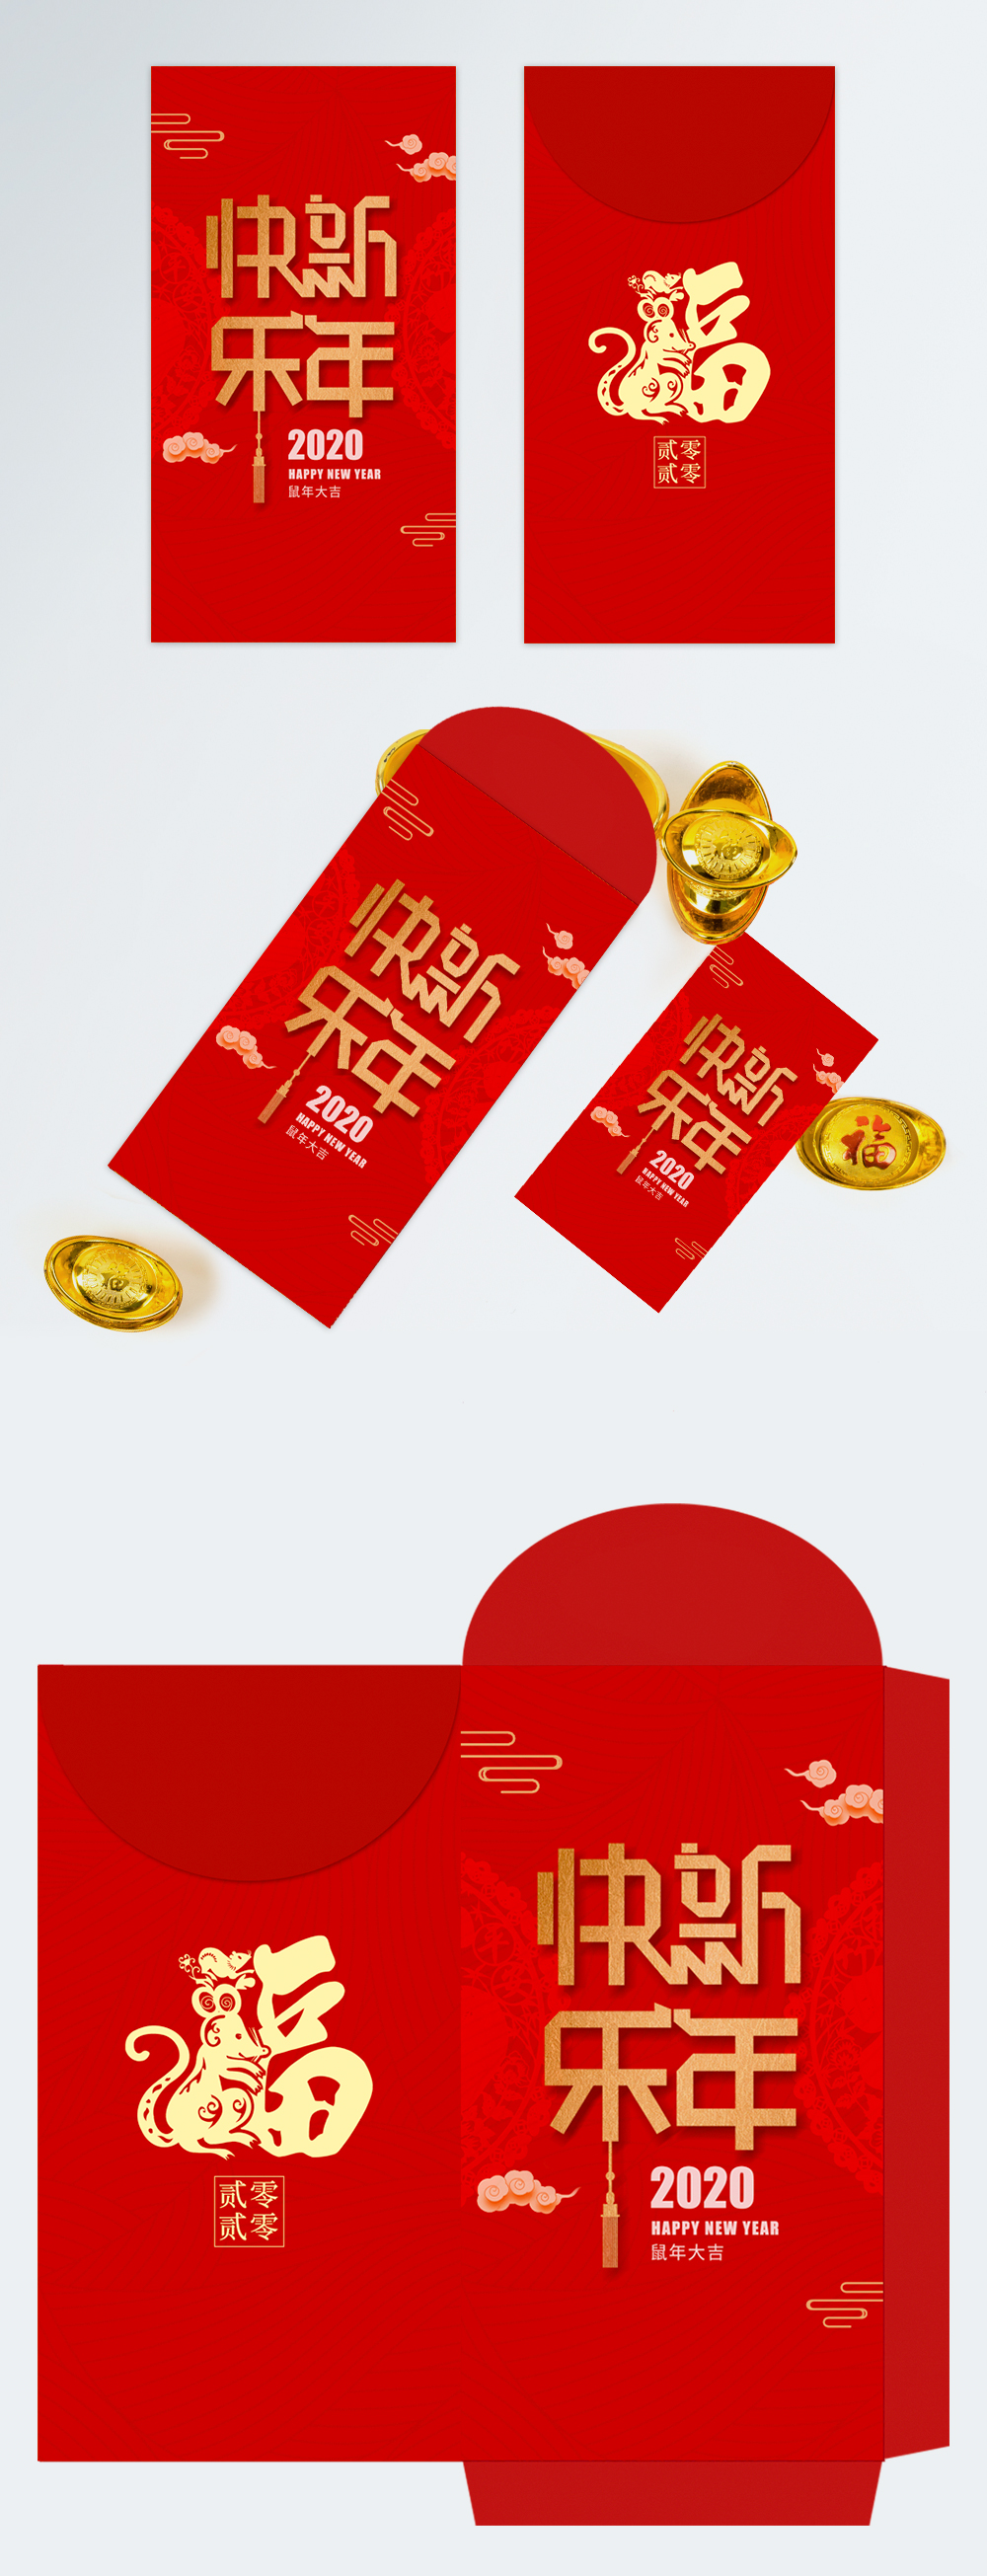 new-year-red-envelope-design-template-image-picture-free-download